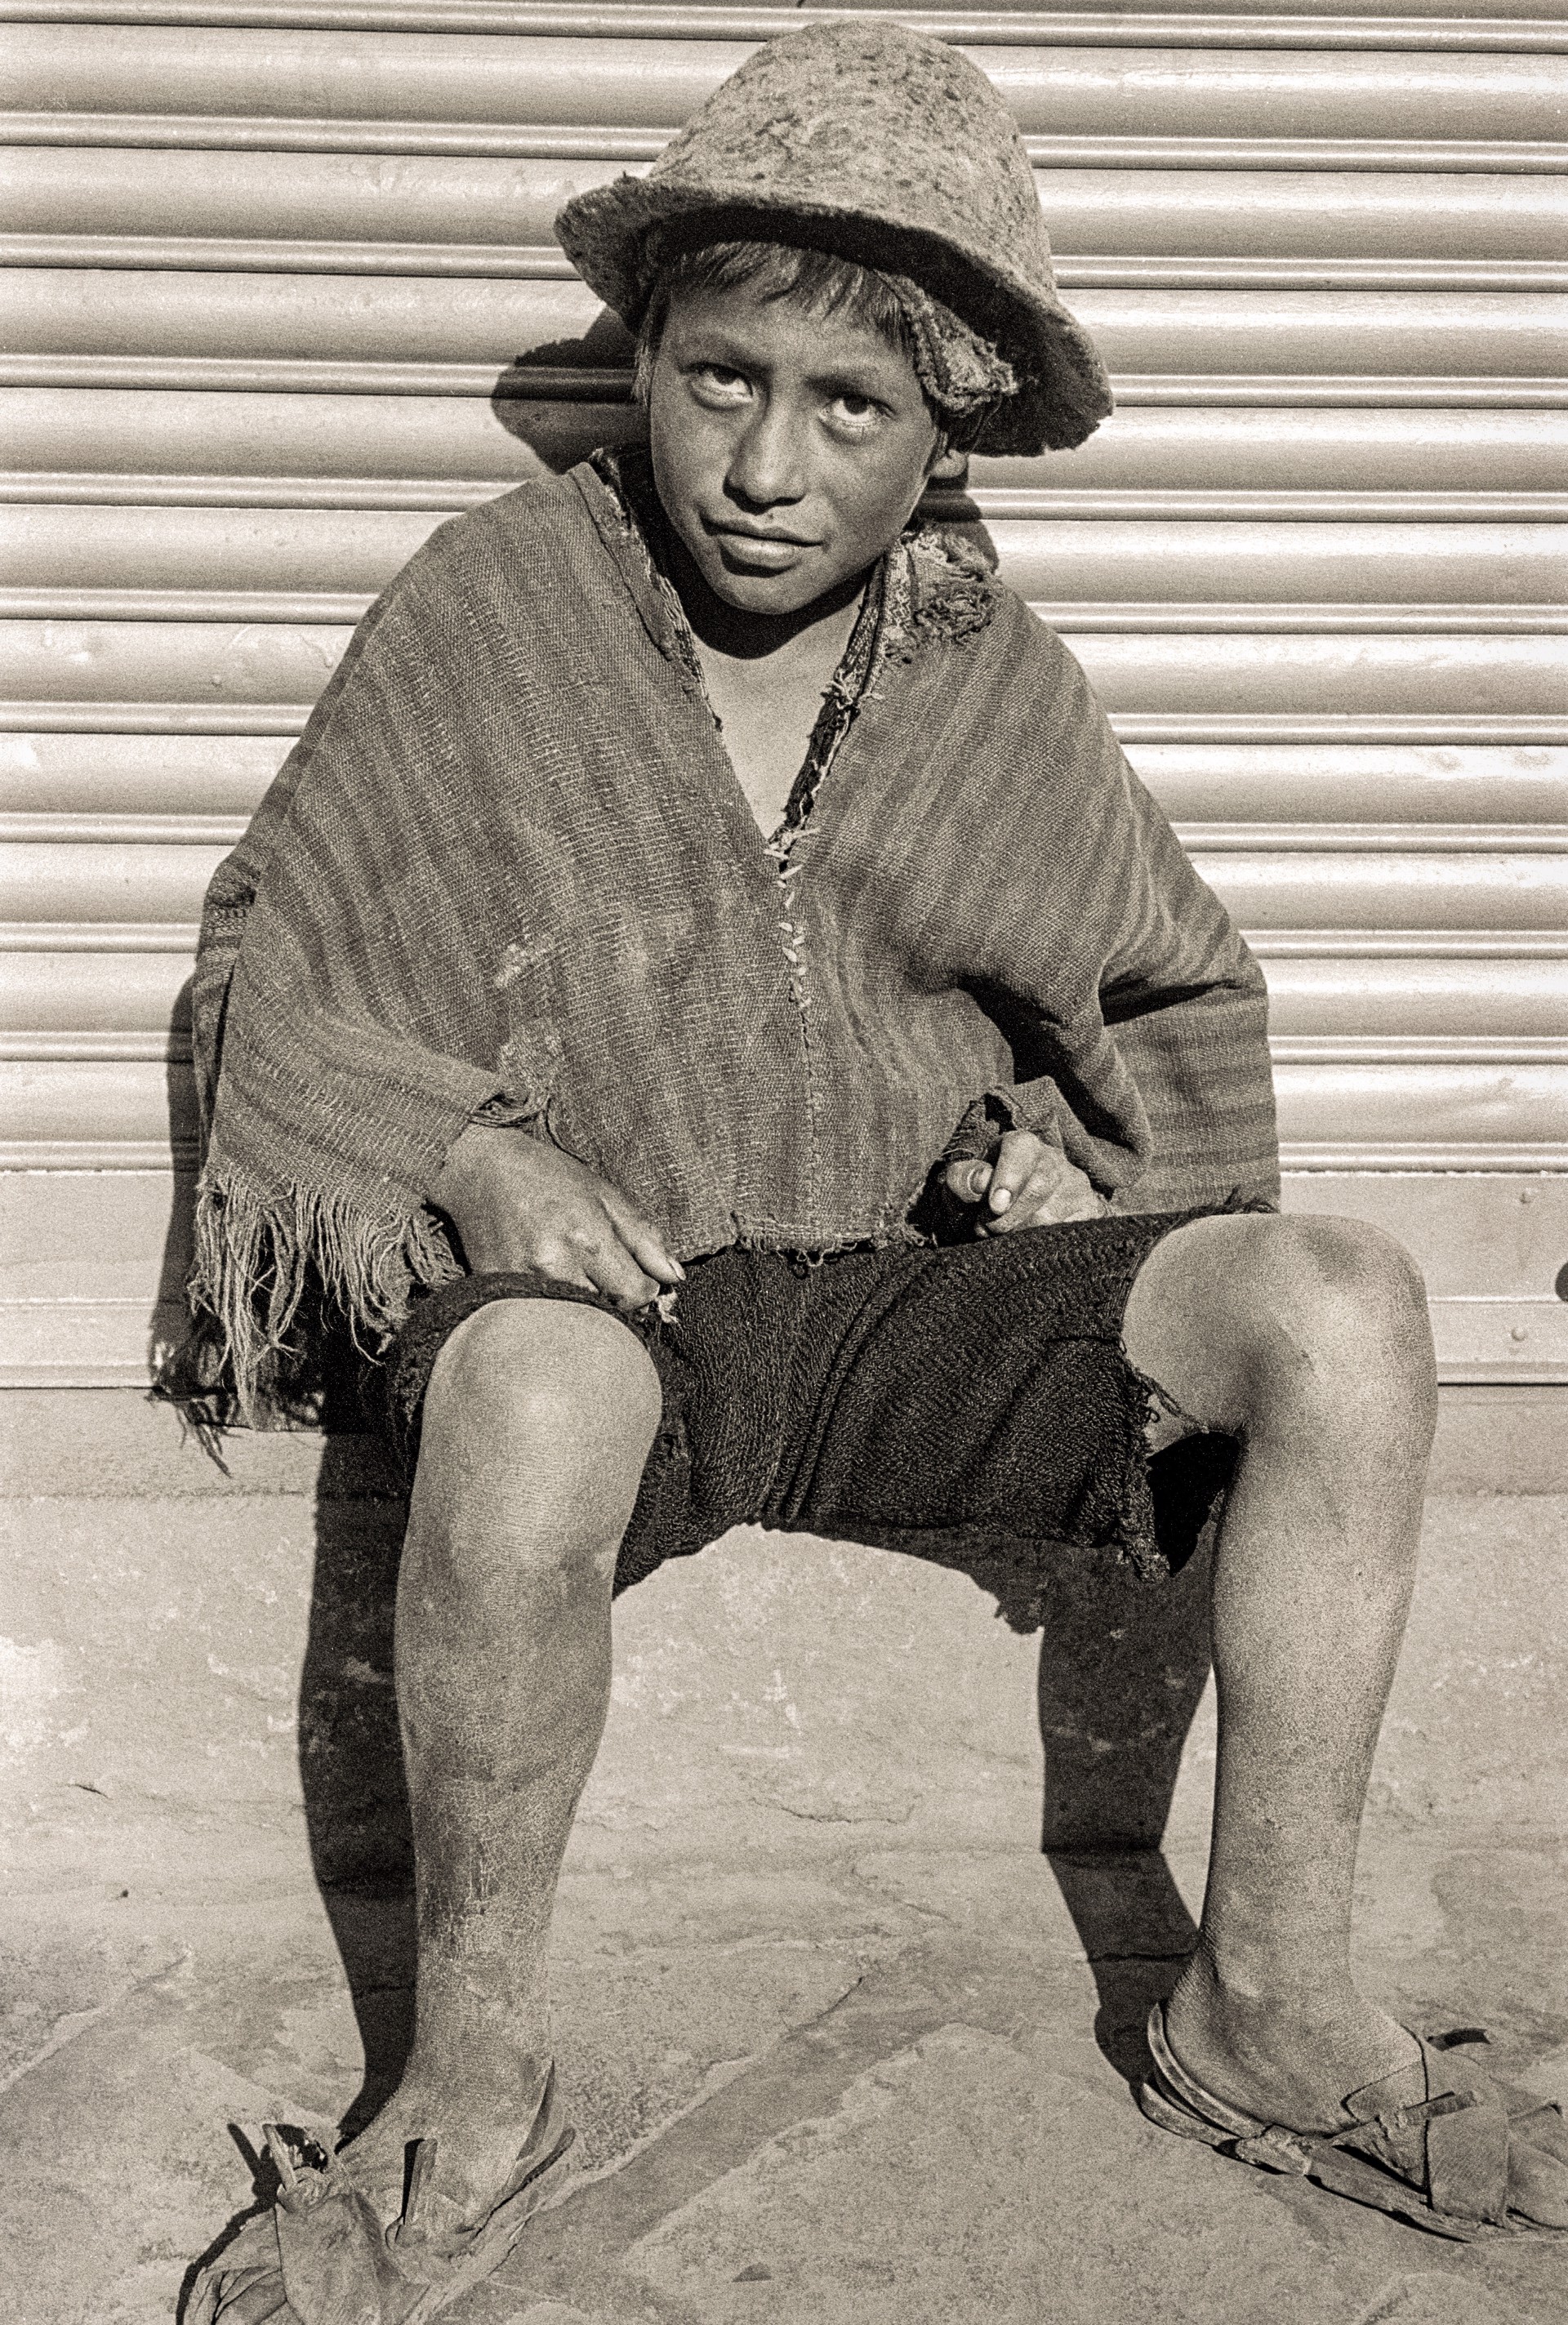 Andean Boy with Hat, Framed (117) by Jack Dempsey